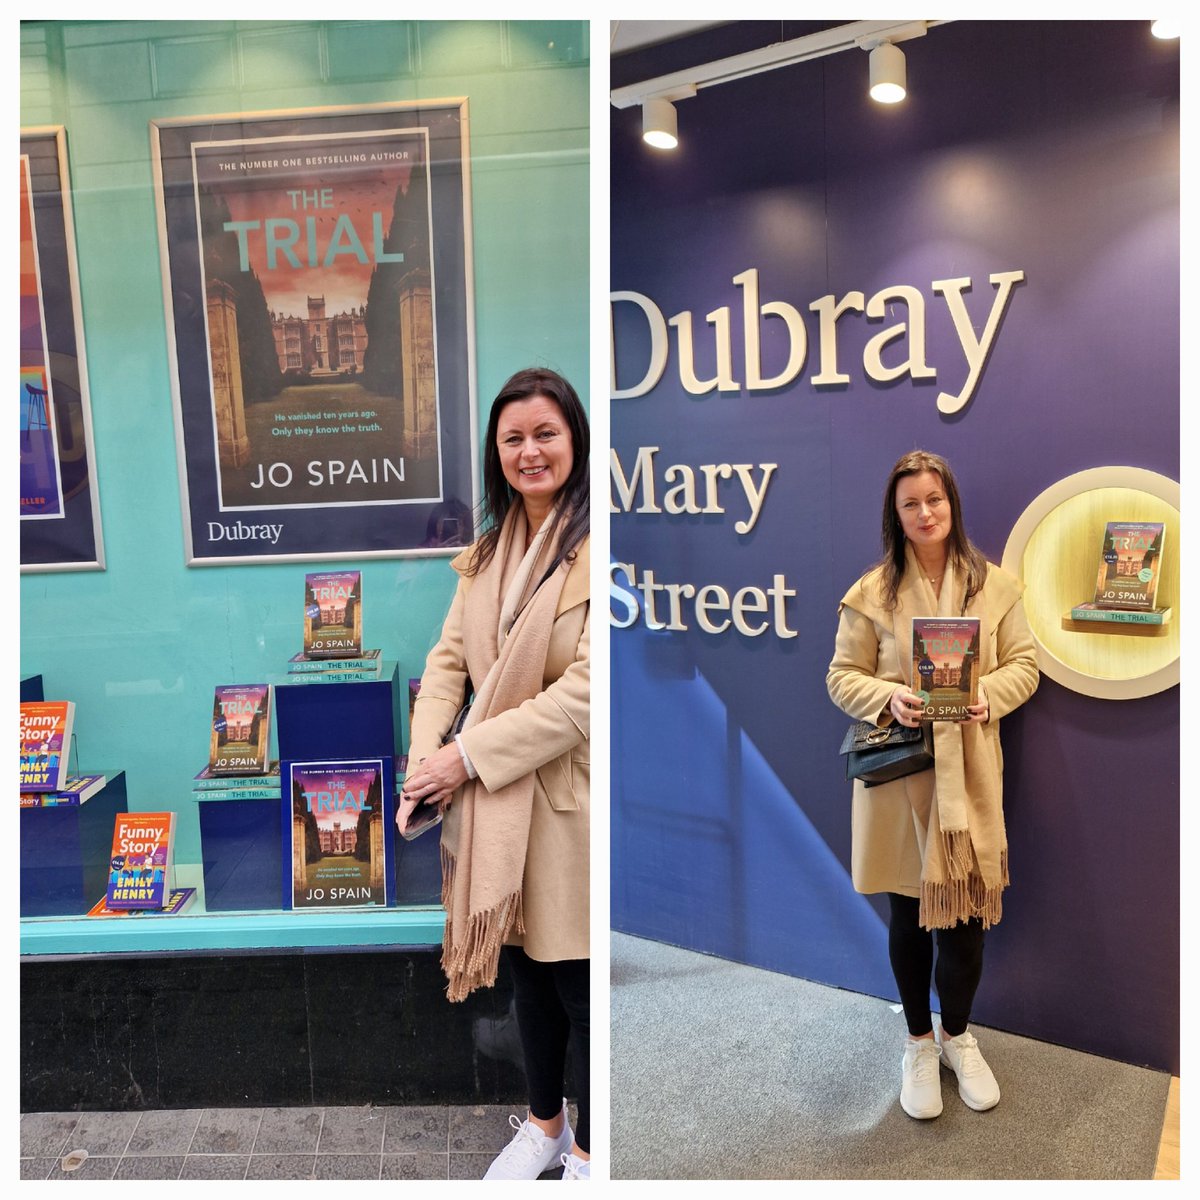 Jo Spain dropped in to see the lovely booksellers in @DubrayBooks Mary St and signed copies of her new thriller - The Trial. Great window display. @QuercusBooks